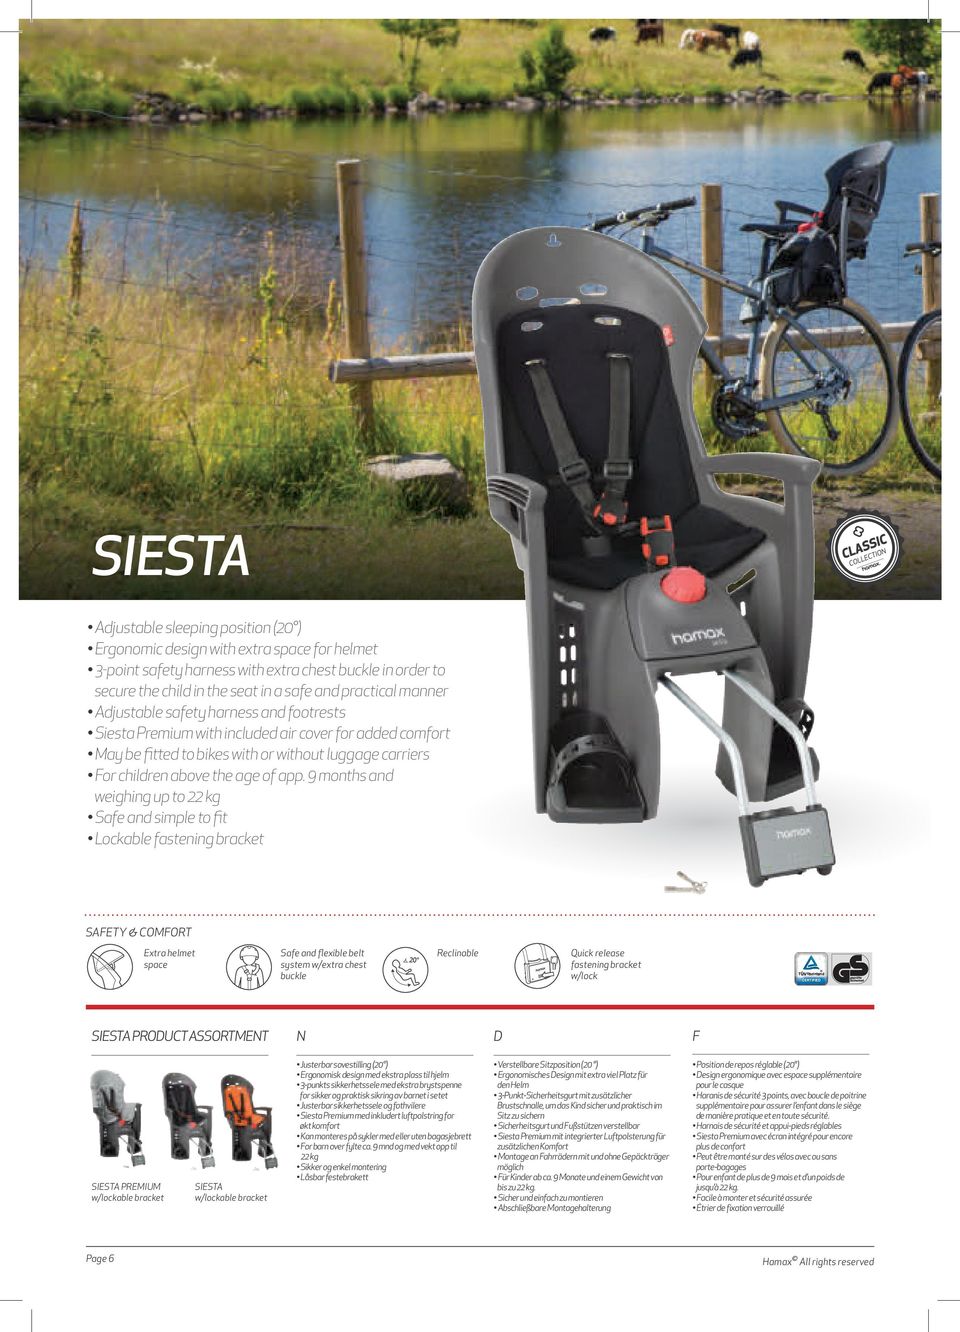 9 months and weighing up to 22 kg Safe and simple to fit Lockable fastening bracket SAETY & COMORT Extra helmet space Safe and flexible belt system w/extra chest buckle Reclinable Quick release